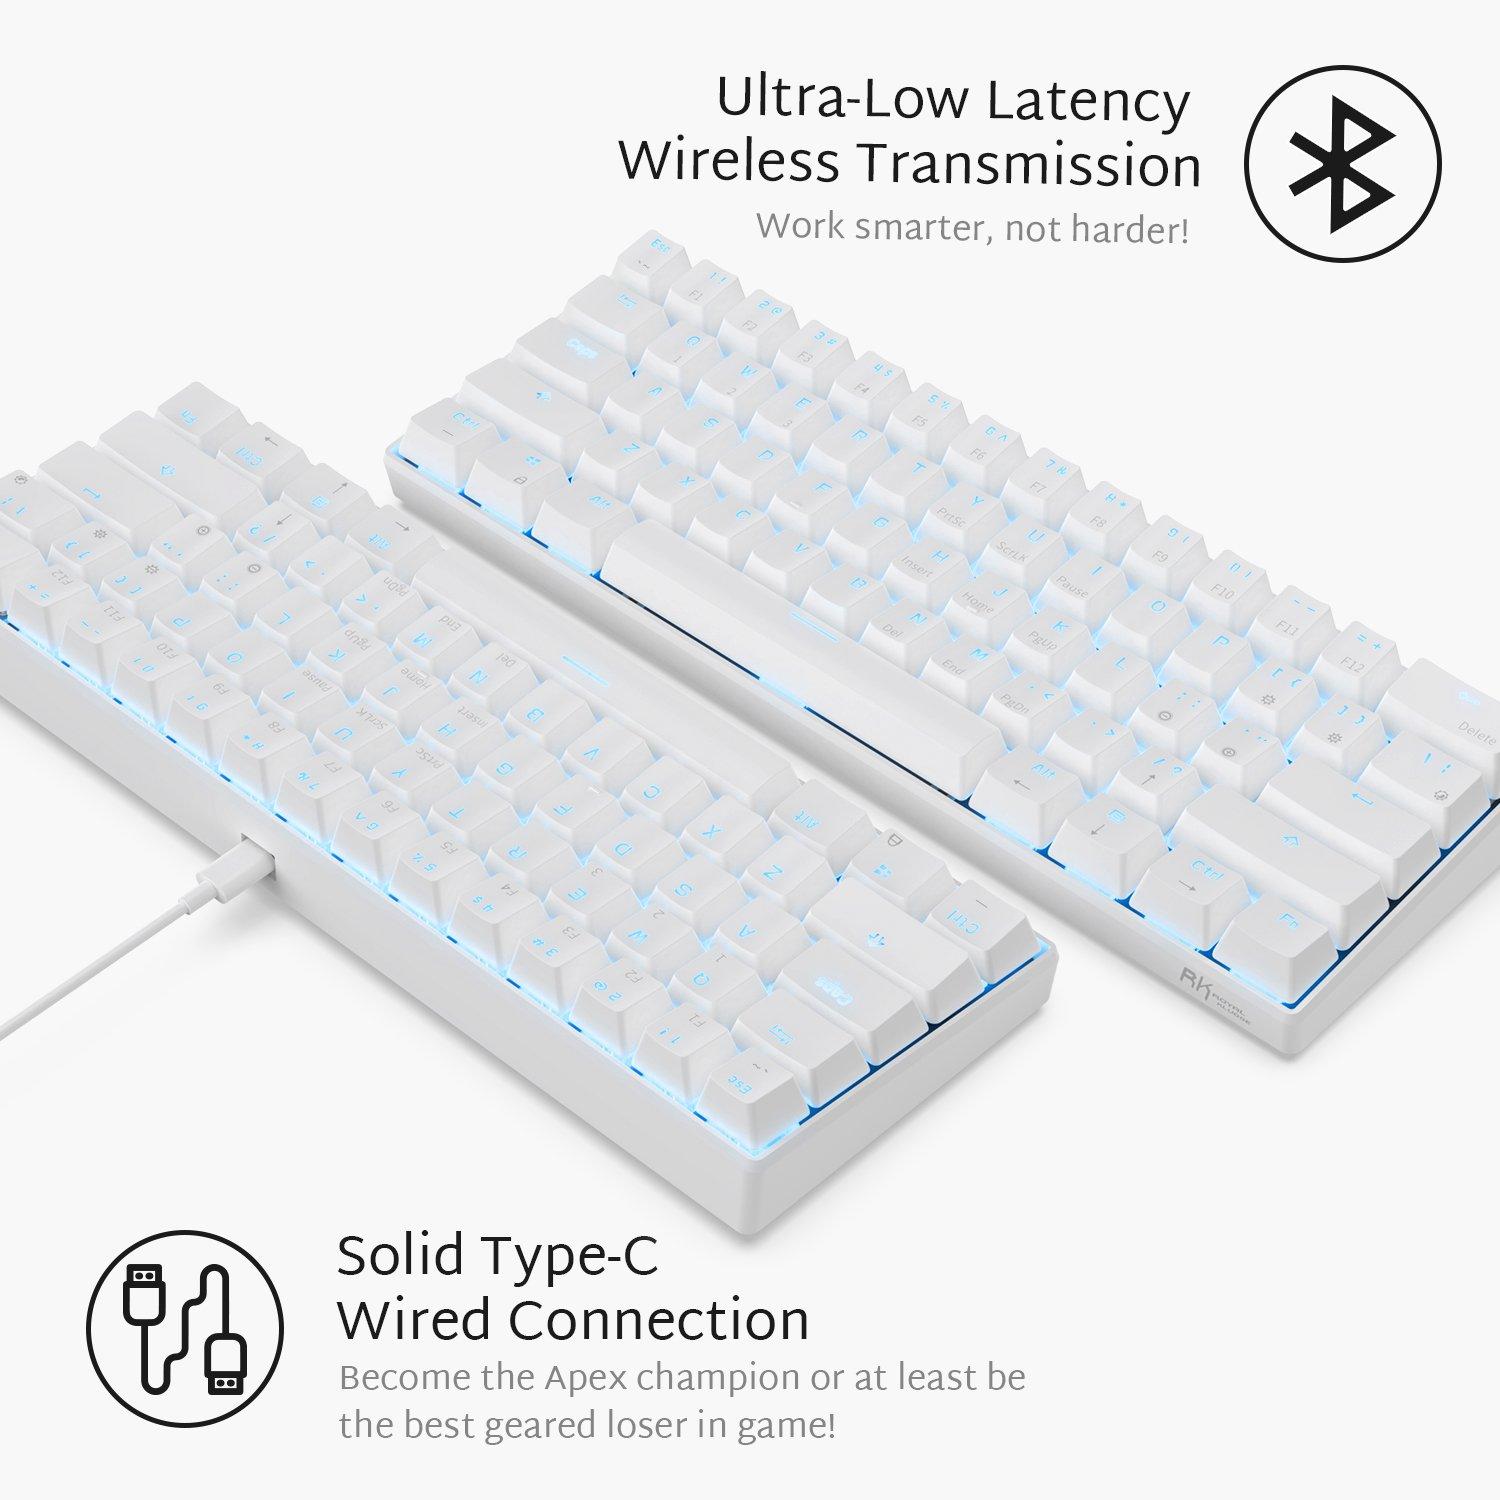 RK ROYAL KLUDGE RK61 Wired 60% Mechanical Gaming Keyboard RGB Backlit  Ultra-Compact Hot-Swappable Blue Switch White